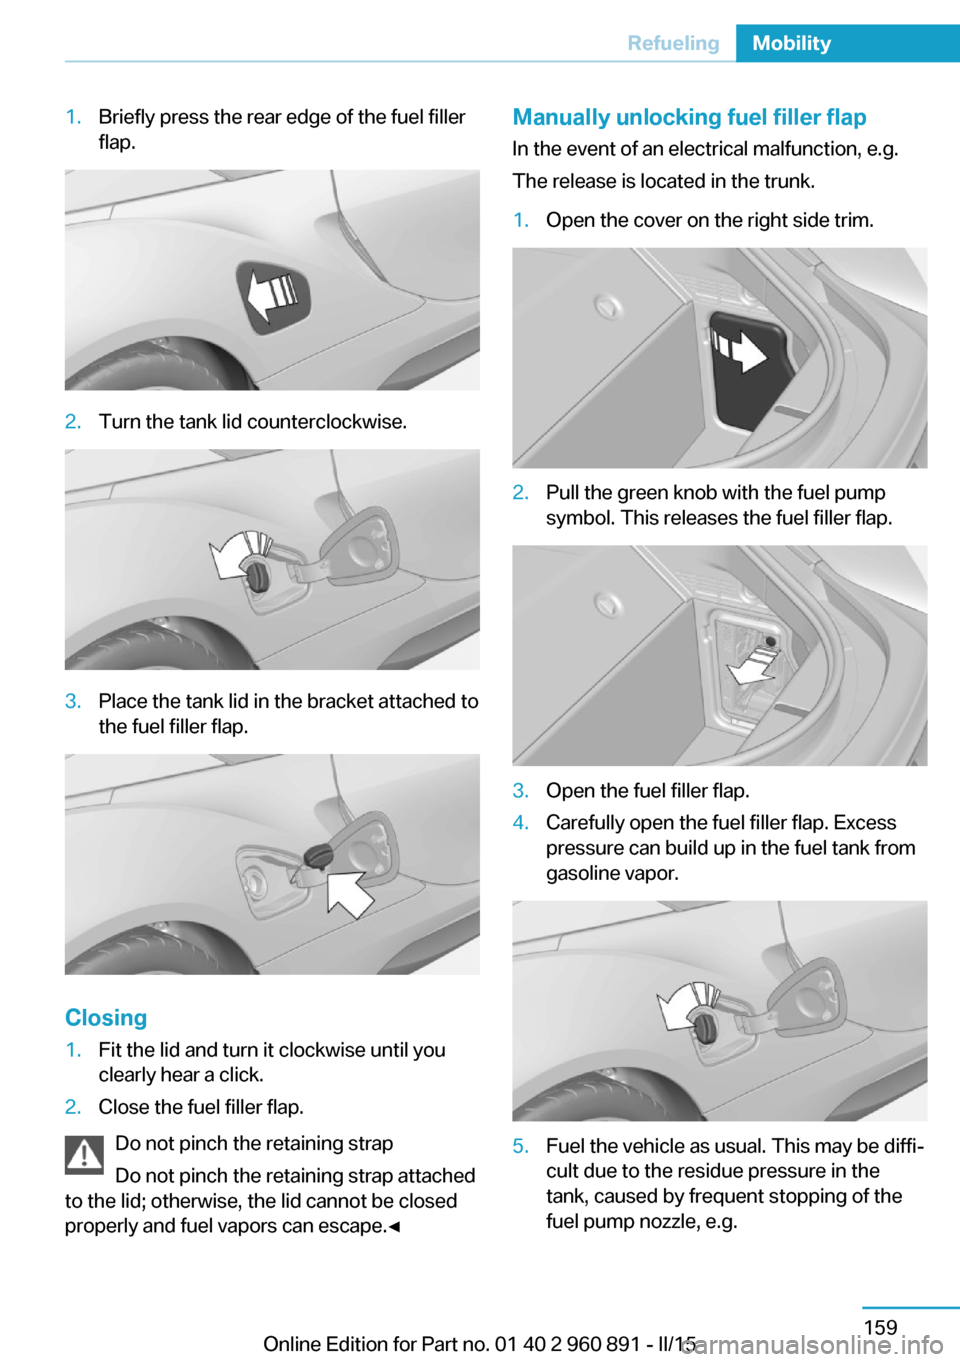 BMW I8 2015 I12 Owners Manual 1.Briefly press the rear edge of the fuel filler
flap.2.Turn the tank lid counterclockwise.3.Place the tank lid in the bracket attached to
the fuel filler flap.
Closing
1.Fit the lid and turn it clock